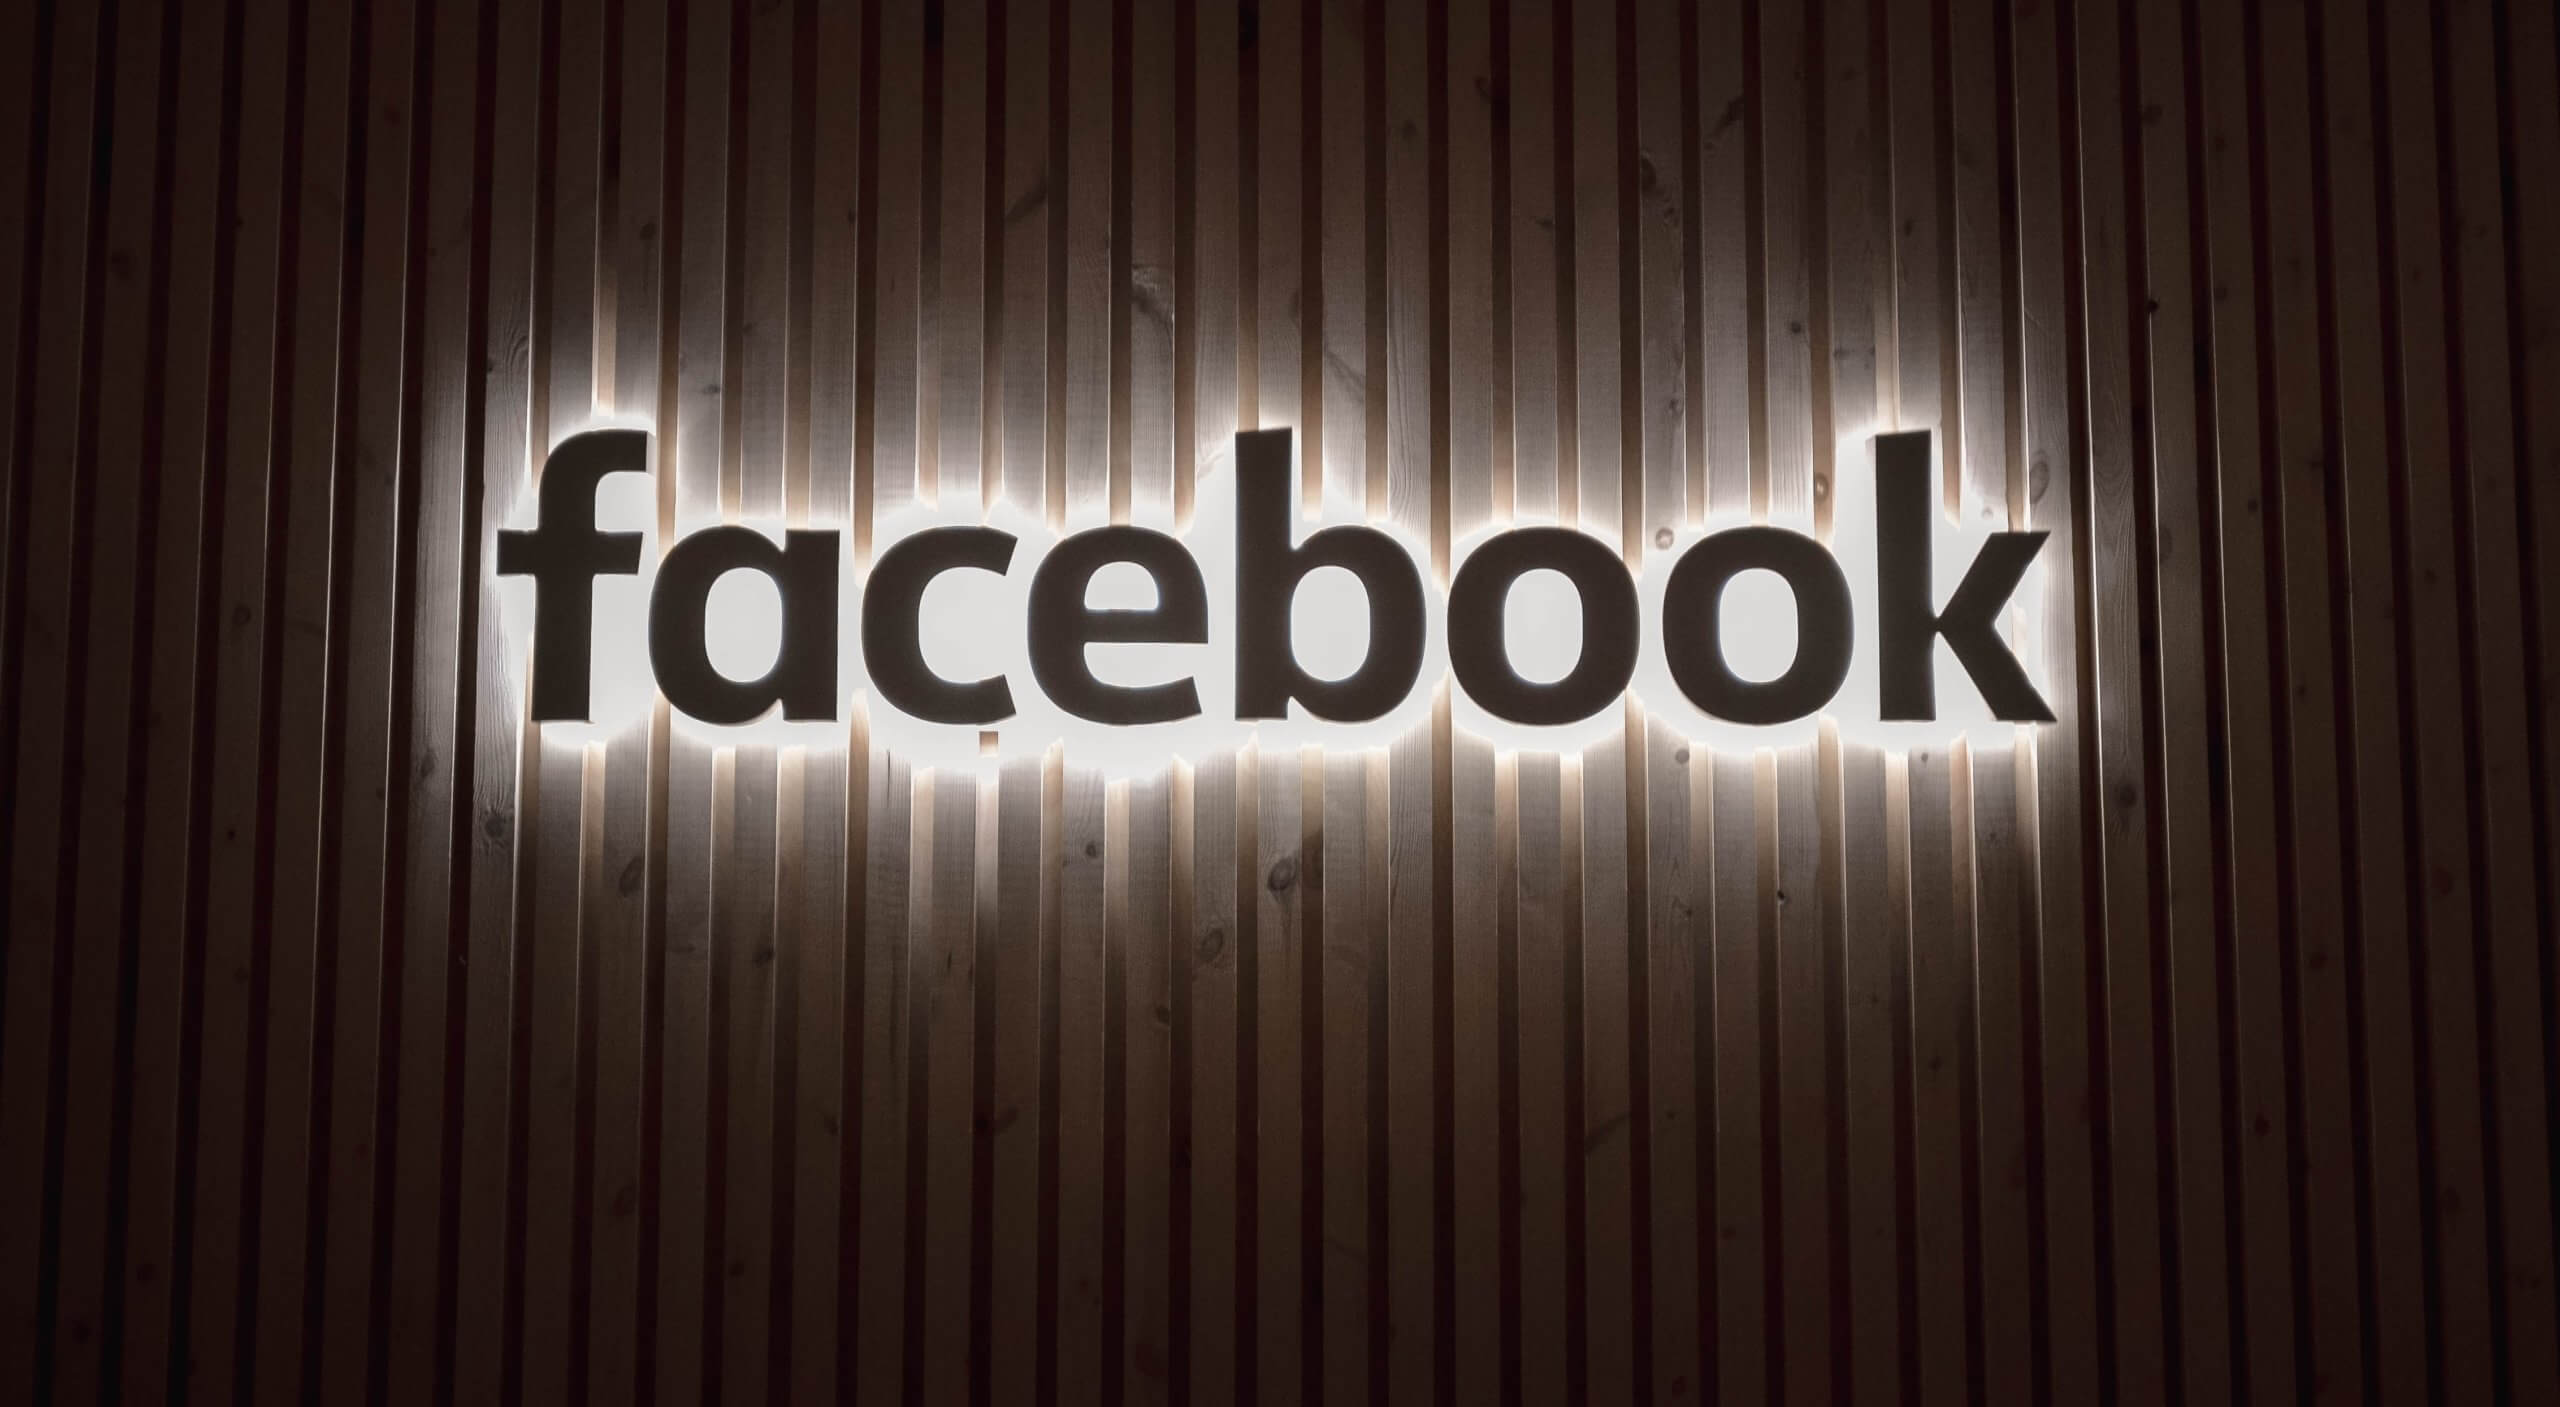 Why Did Facebook Change Its Name?